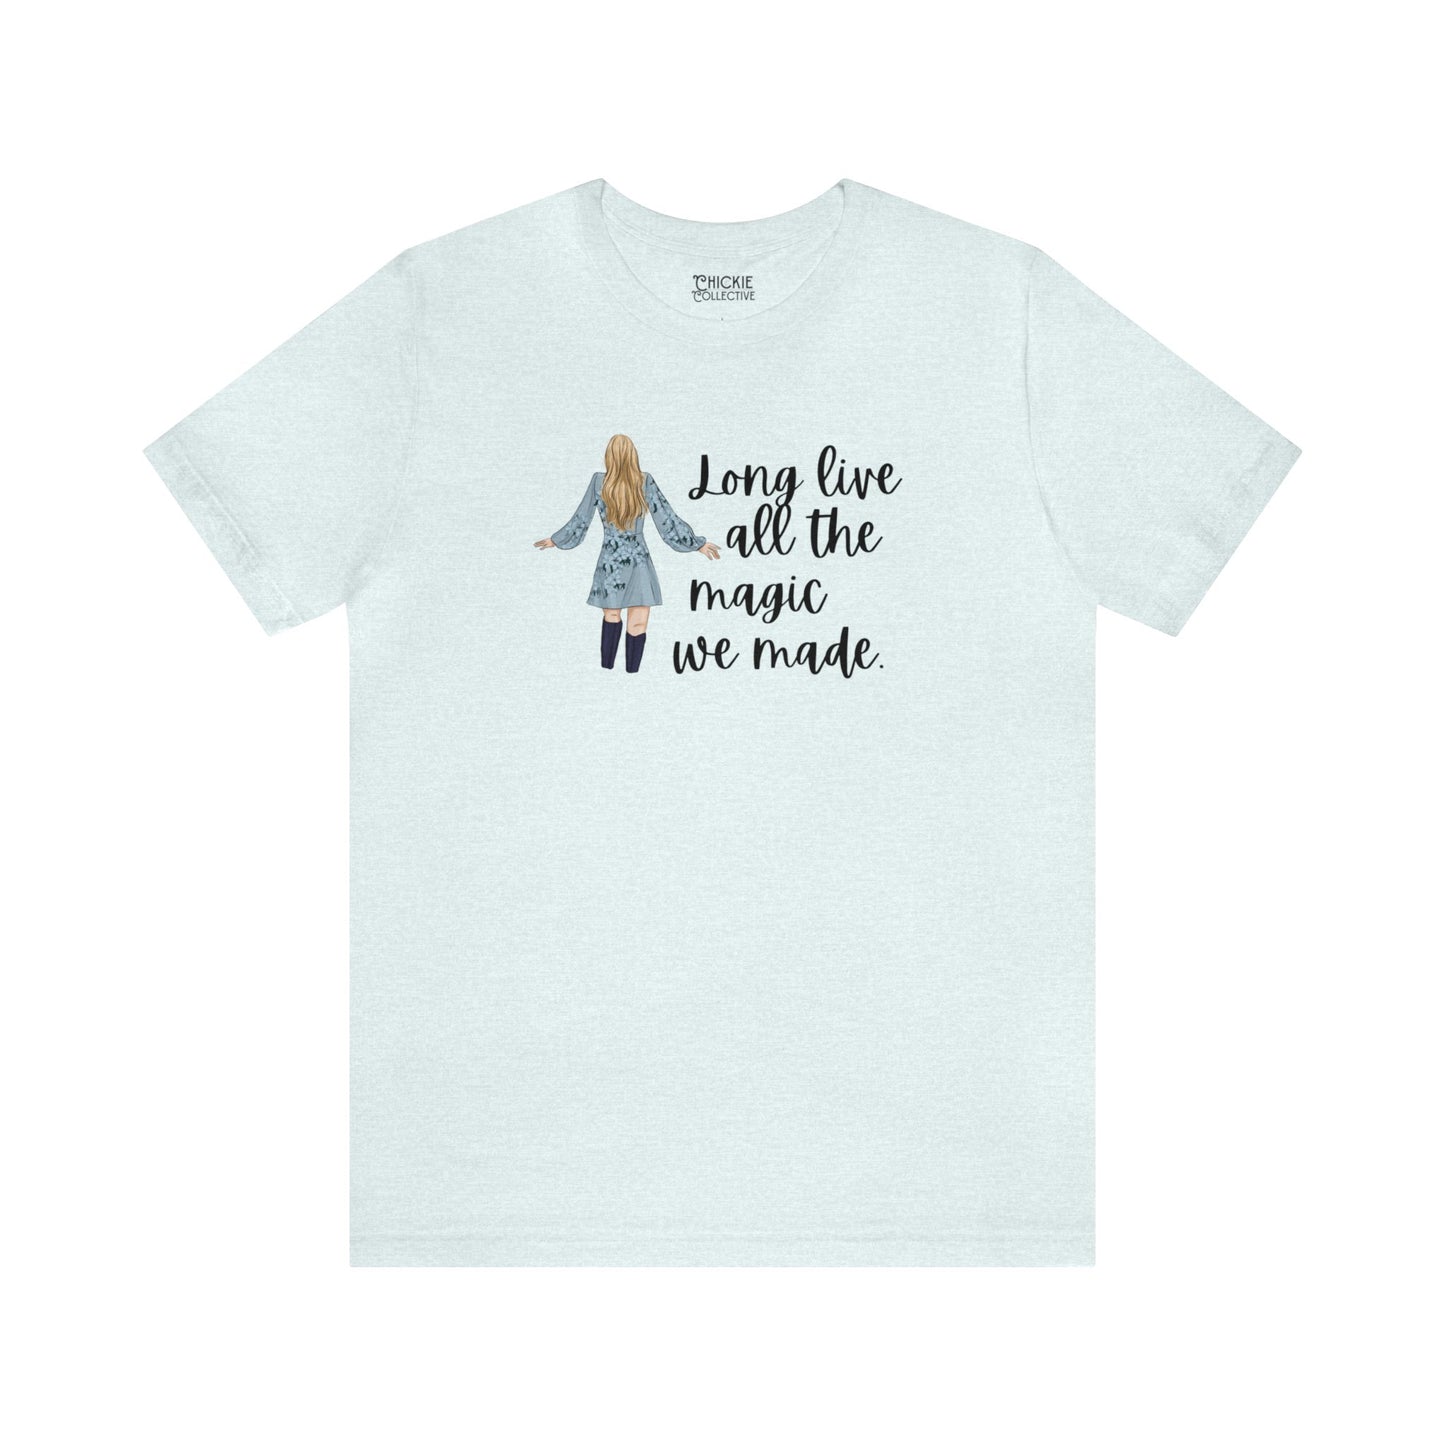 Taylor Swift Preppy Picture T-Shirt - Long Live All The Magic We Made